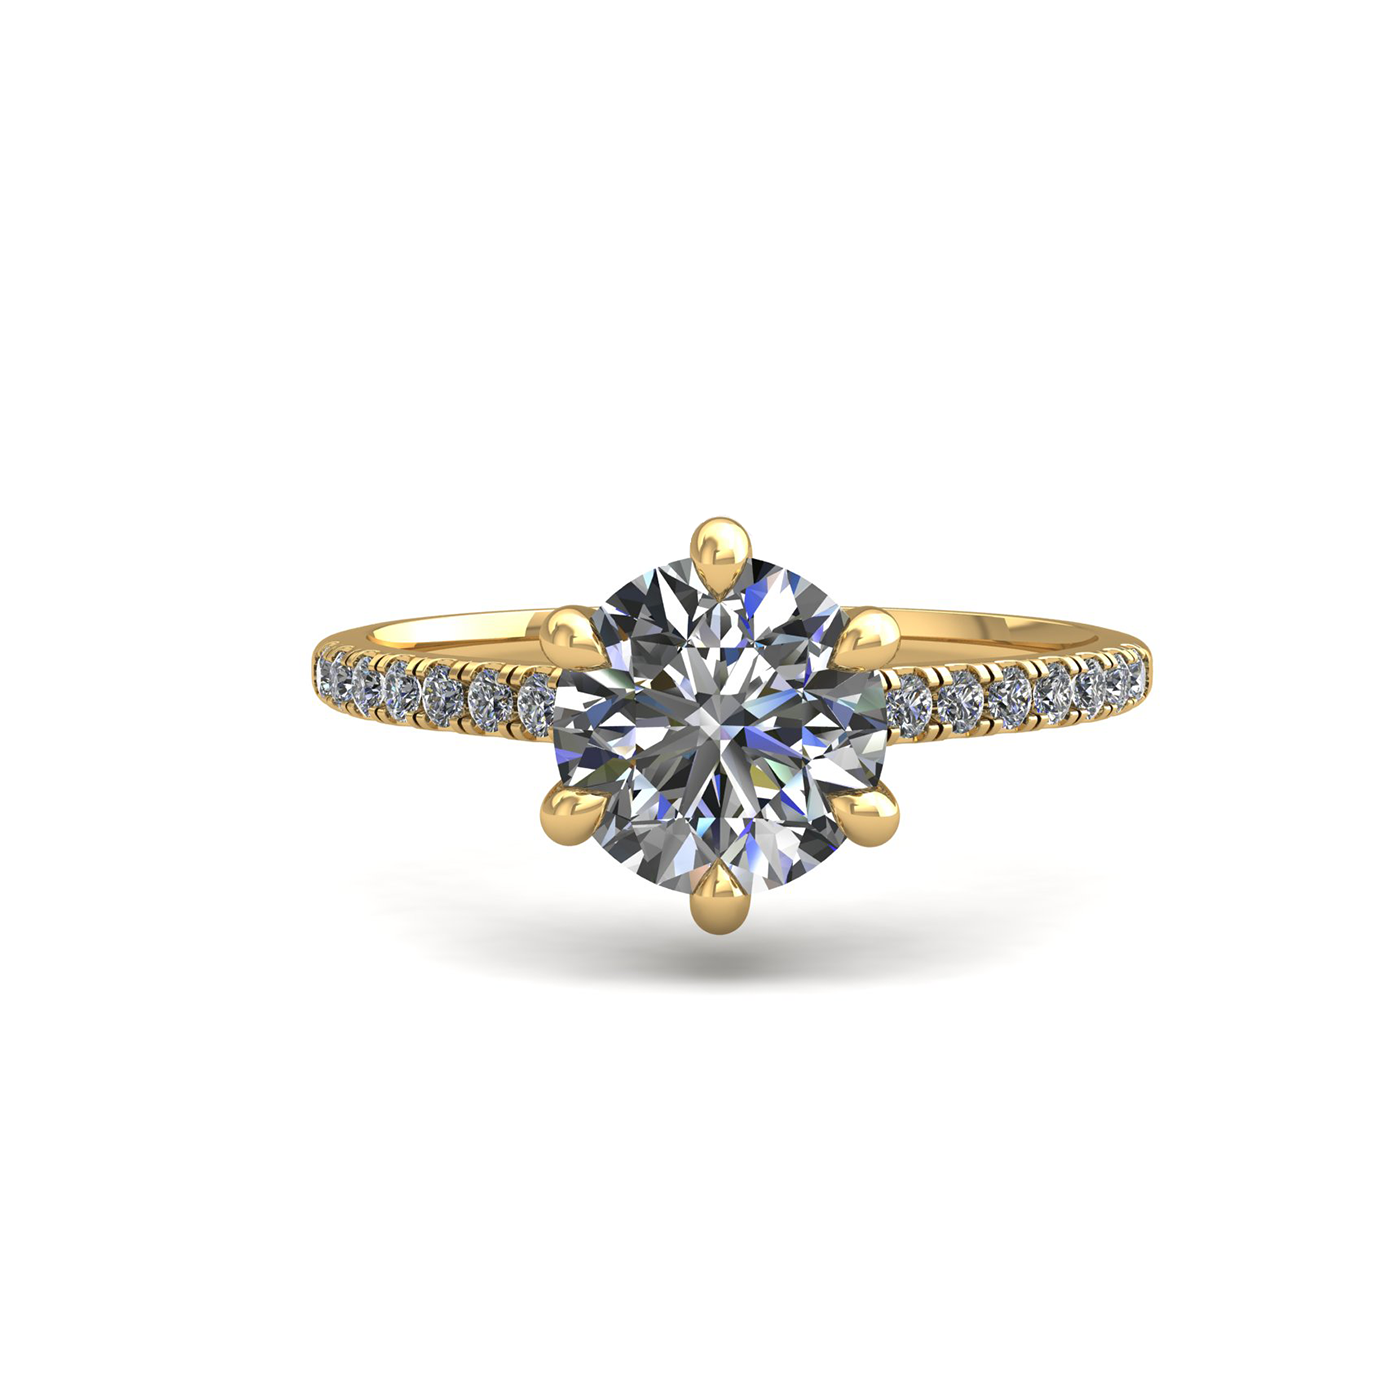 18k yellow gold 2,00 ct 6 prongs round cut diamond engagement ring with whisper thin pavÉ set band Photos & images